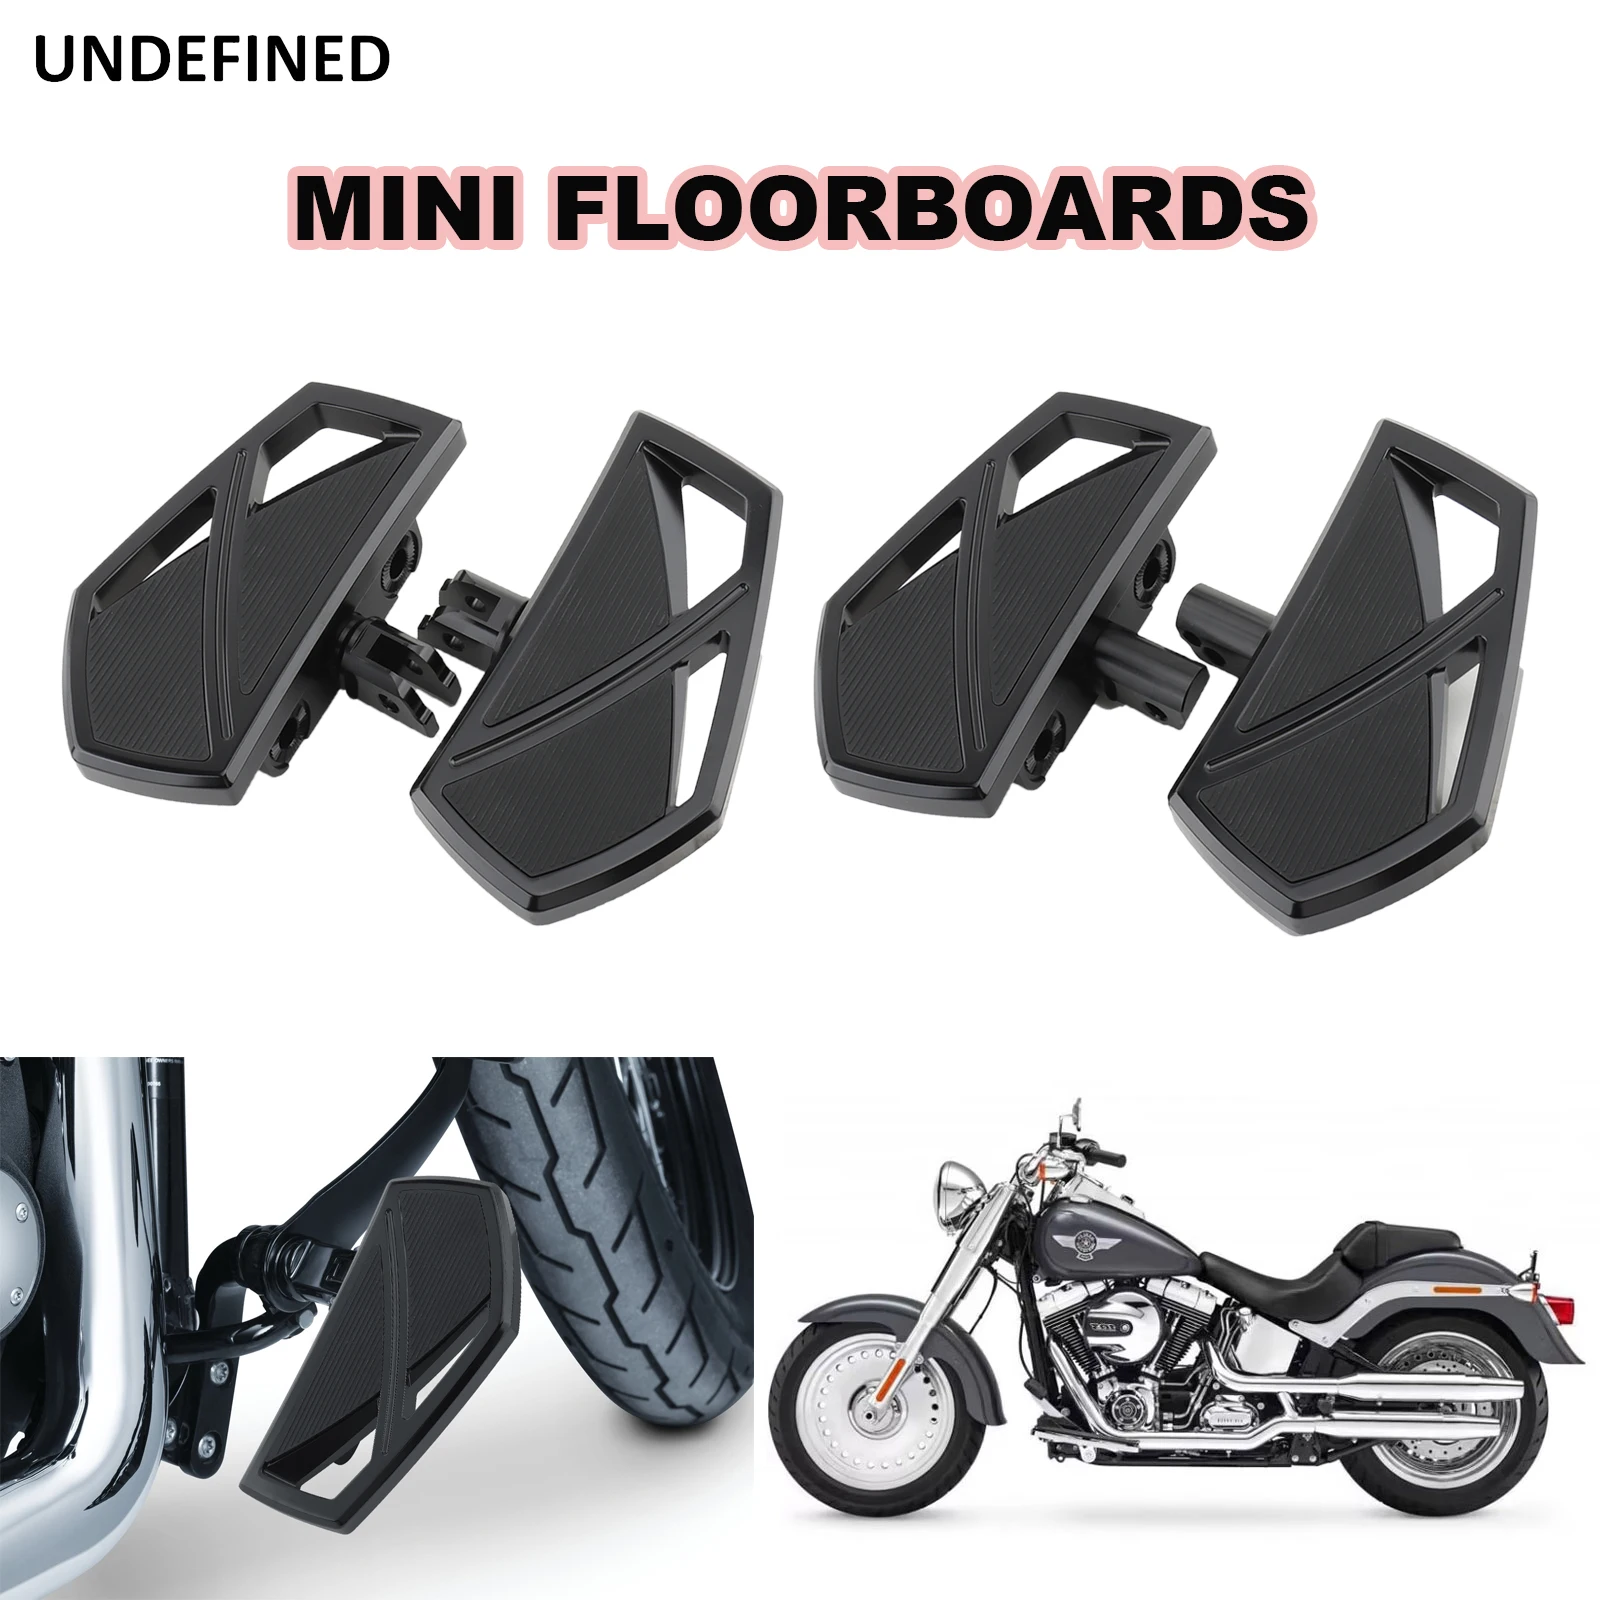 Phantom Black Foot Pegs Mini Floorboards Front Rear Footrest Pedal For H... - $118.07